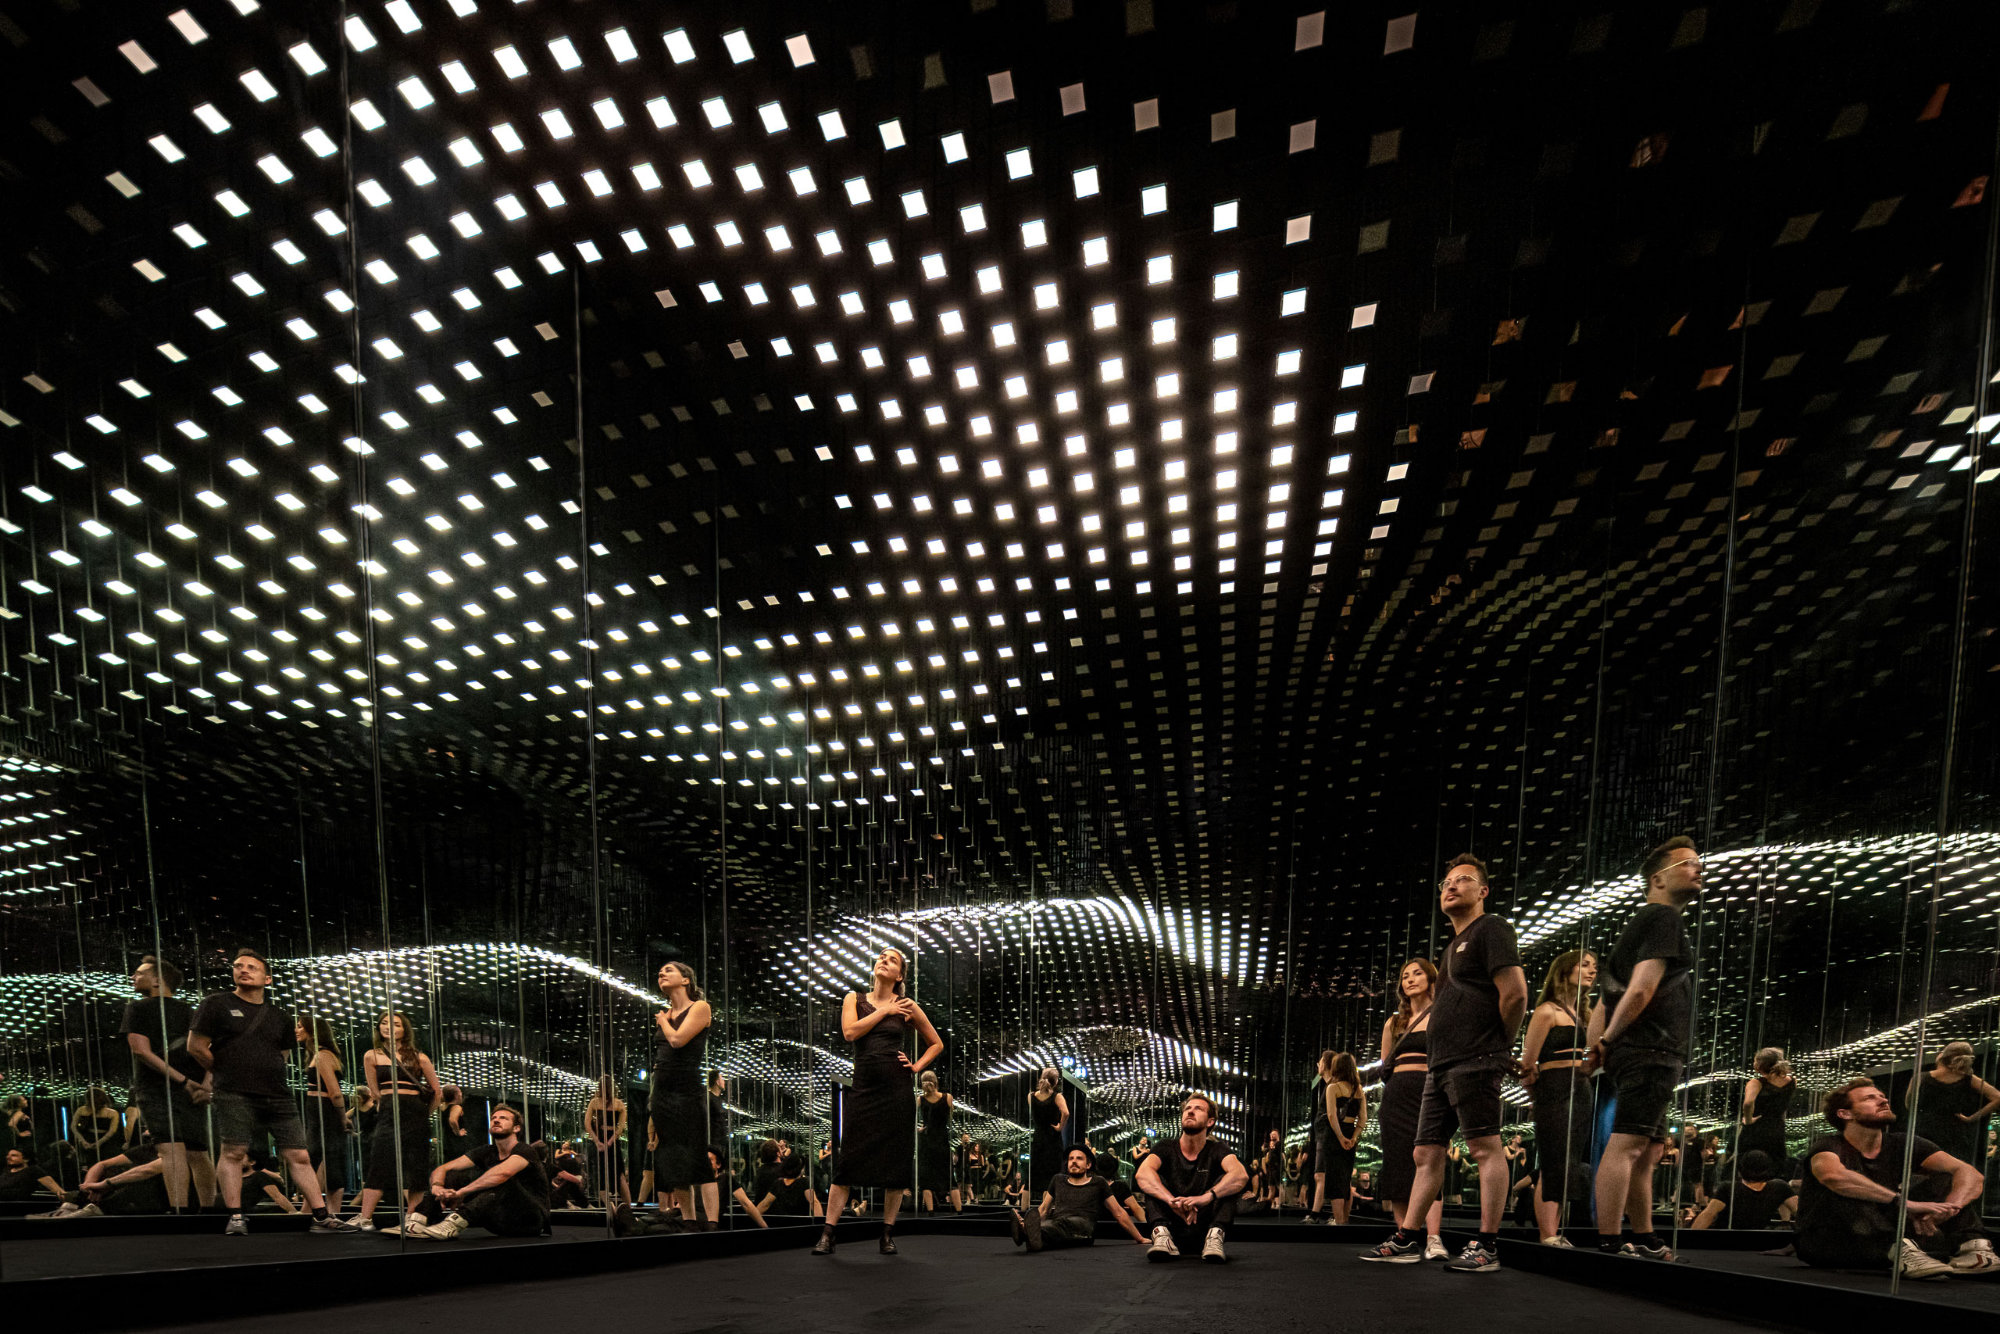 A parallel world of light, space and sound: that’s what the “Dark Matter” exhibition is all about. Photo: Ralph Larmann